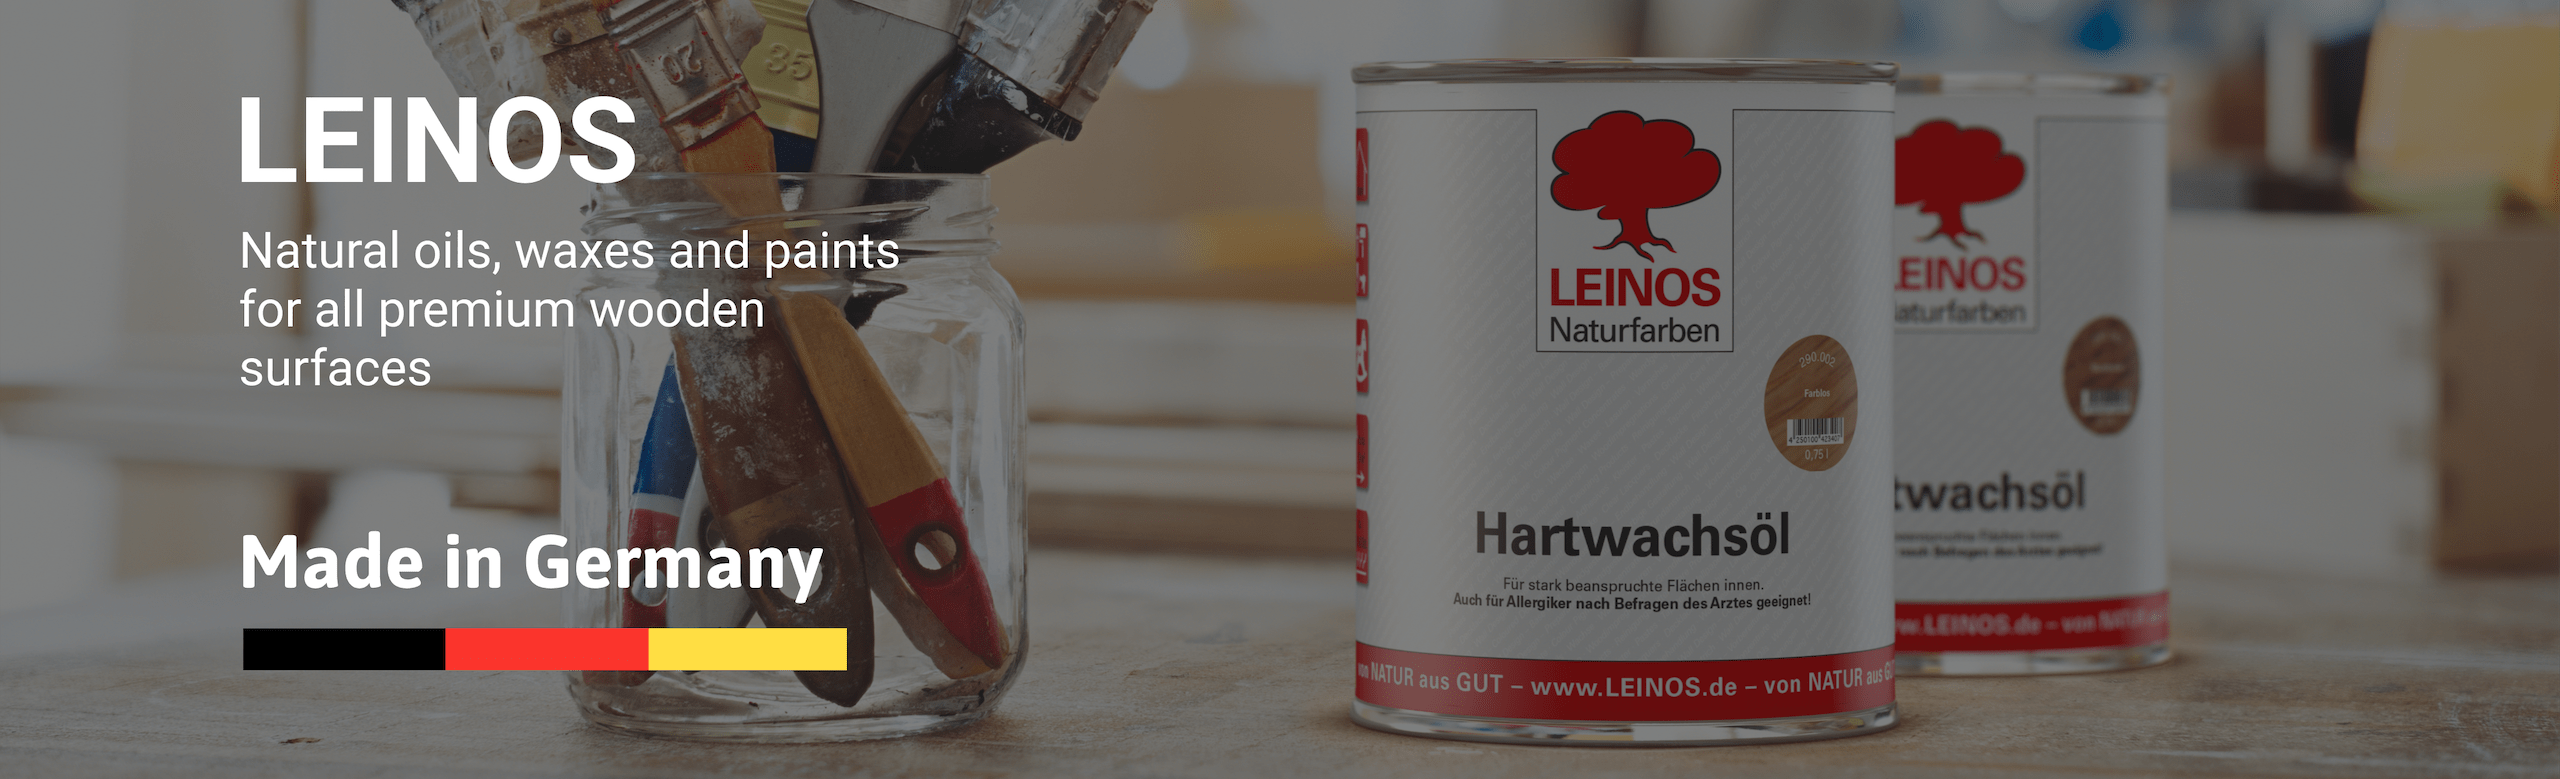 LEINOS Natural Wood Paints and Finishes - Eco-Friendly and Safe for All